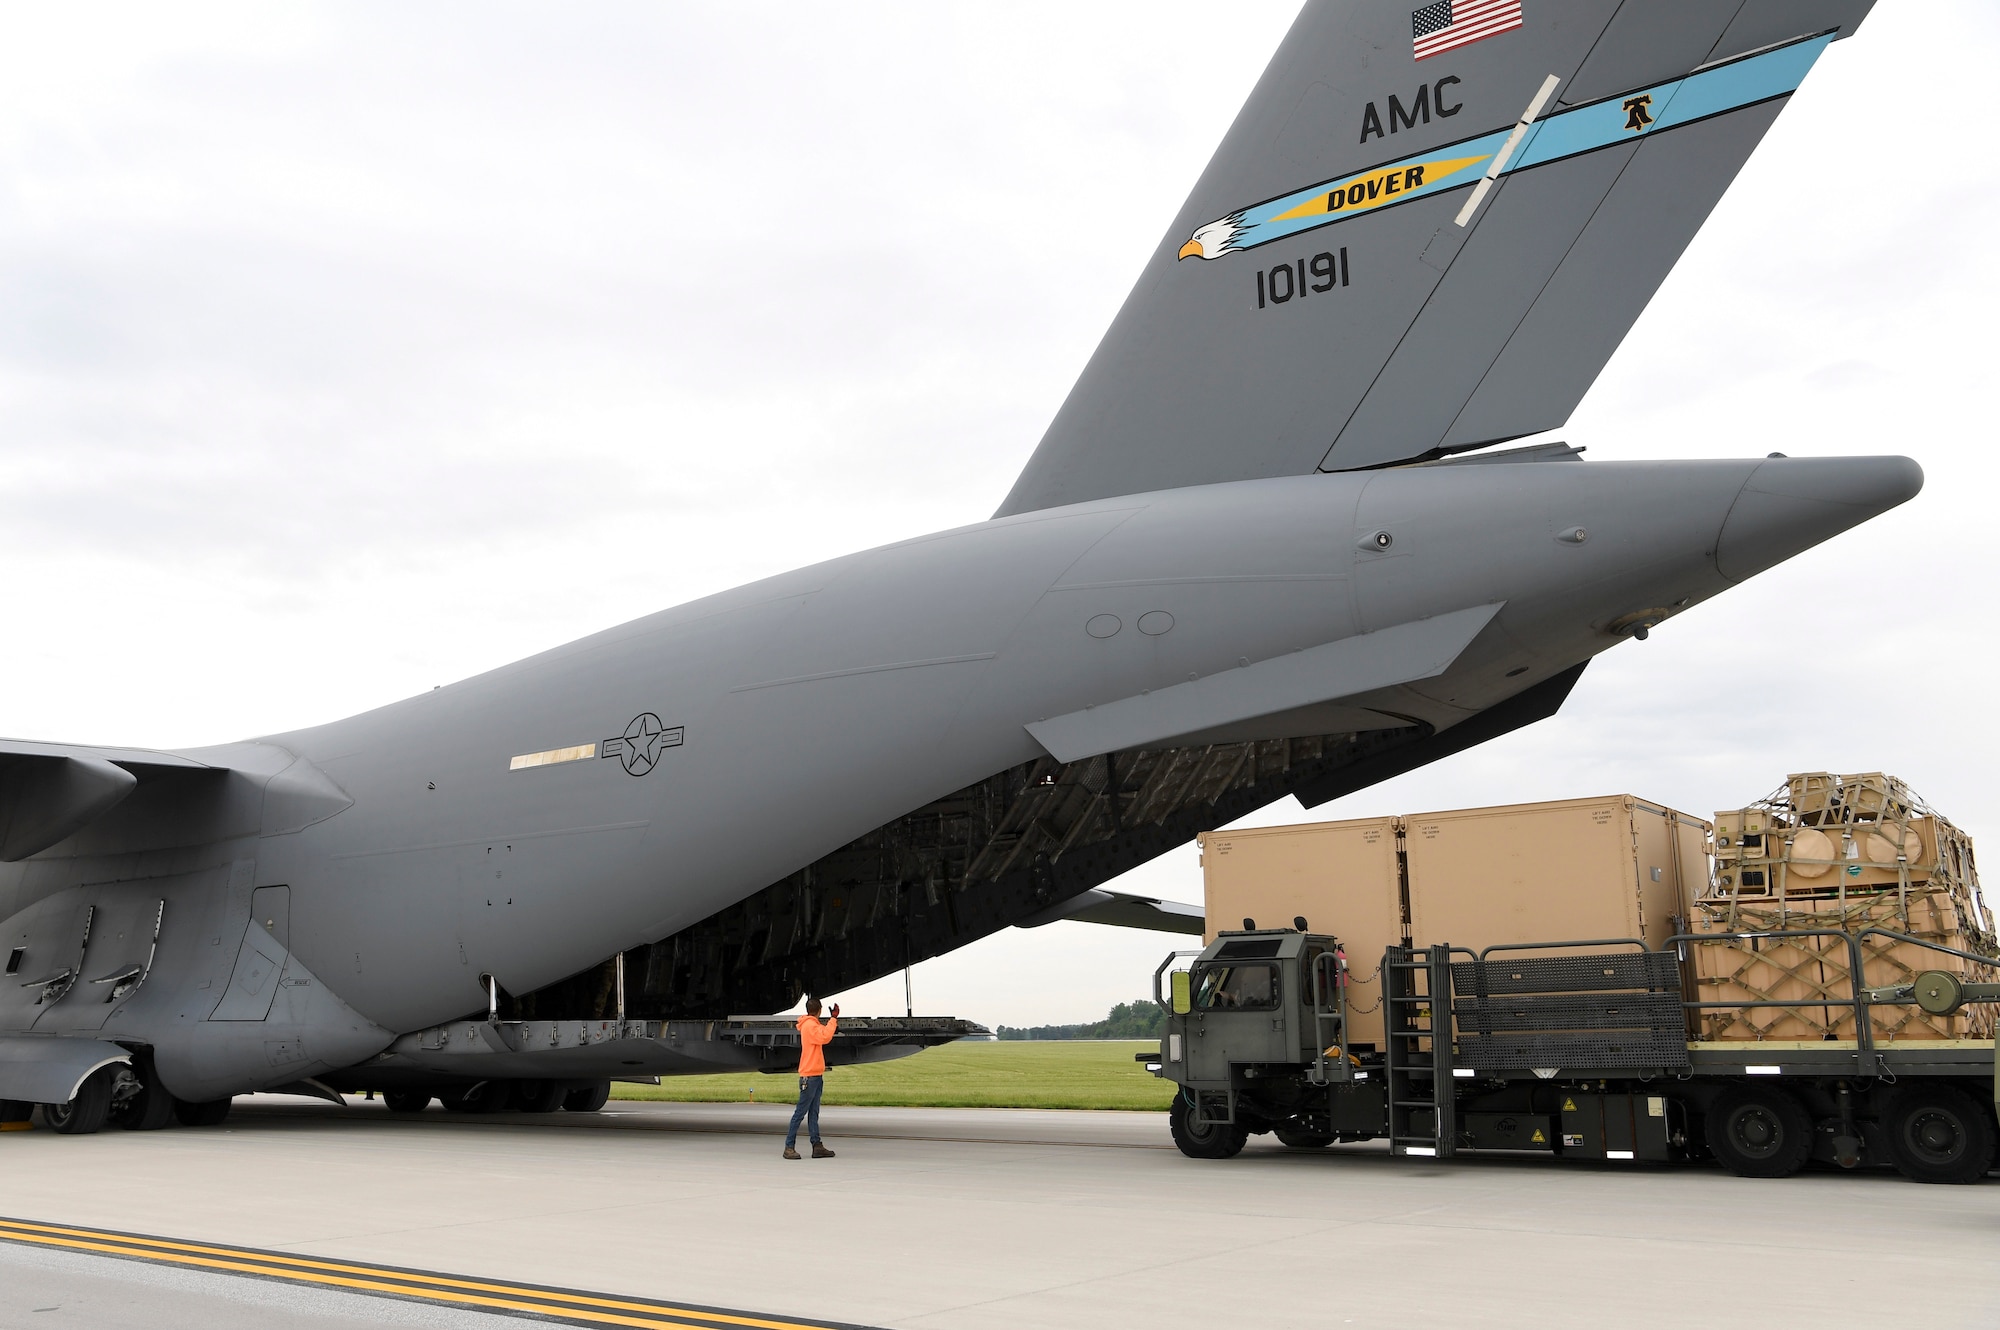 Cargo from Grissom is loaded onto a Hawaii-bound C-17 Globemaster III from Dover AFB, Del., June 1, 2021. Members of the Detachment 1, 622nd Contingency Equipment Group stationed at Grissom palletized and oversaw the cargo shipment for exercise Pacific Warriorz 2021. (U.S. Air Force photo/Staff Sgt. Chris Massey)